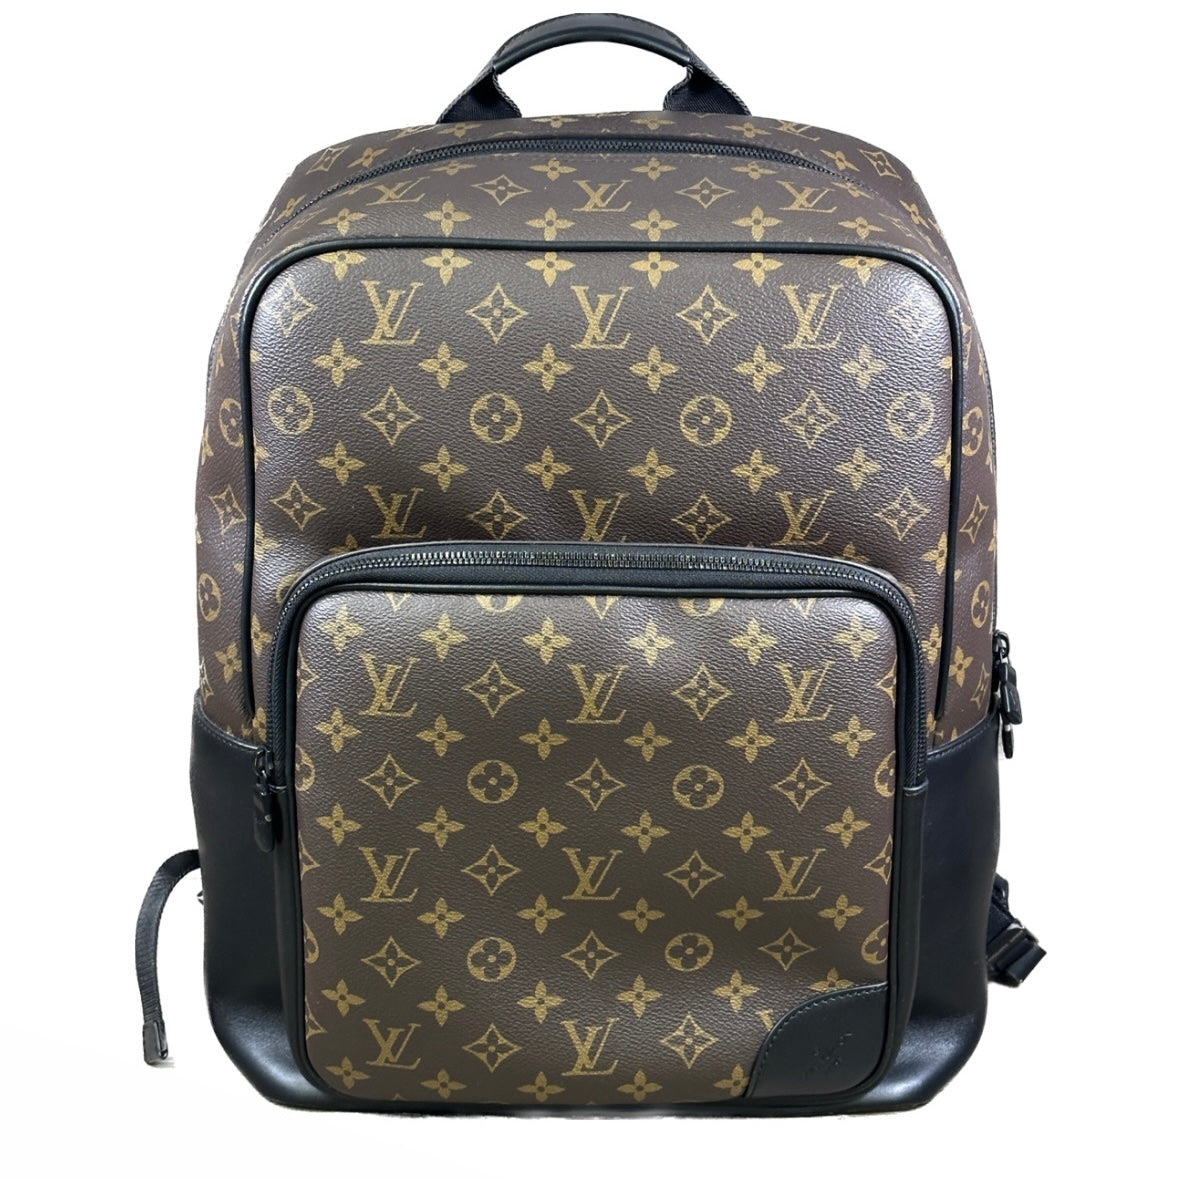 lv backpack purse for women